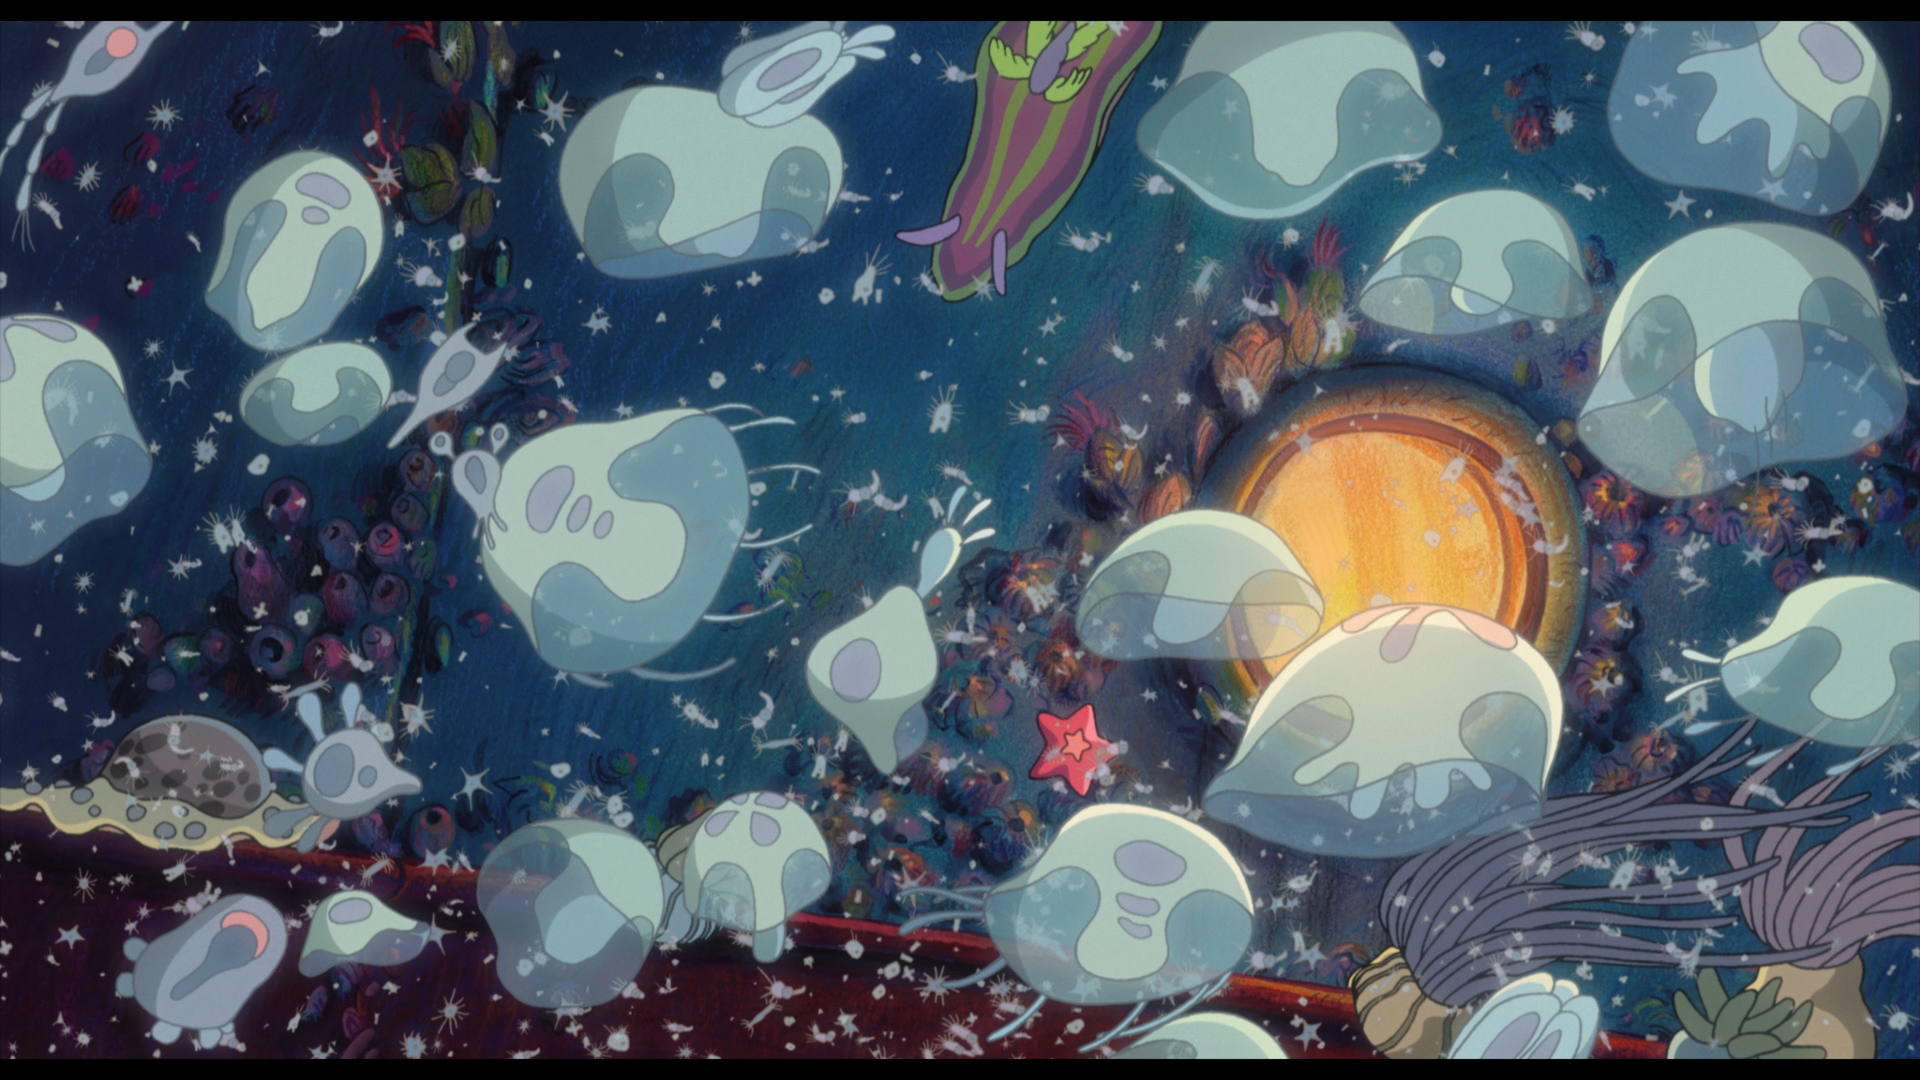 A screencap of the movie Ponyo, with jellyfish and sea boogers dancing across the sea